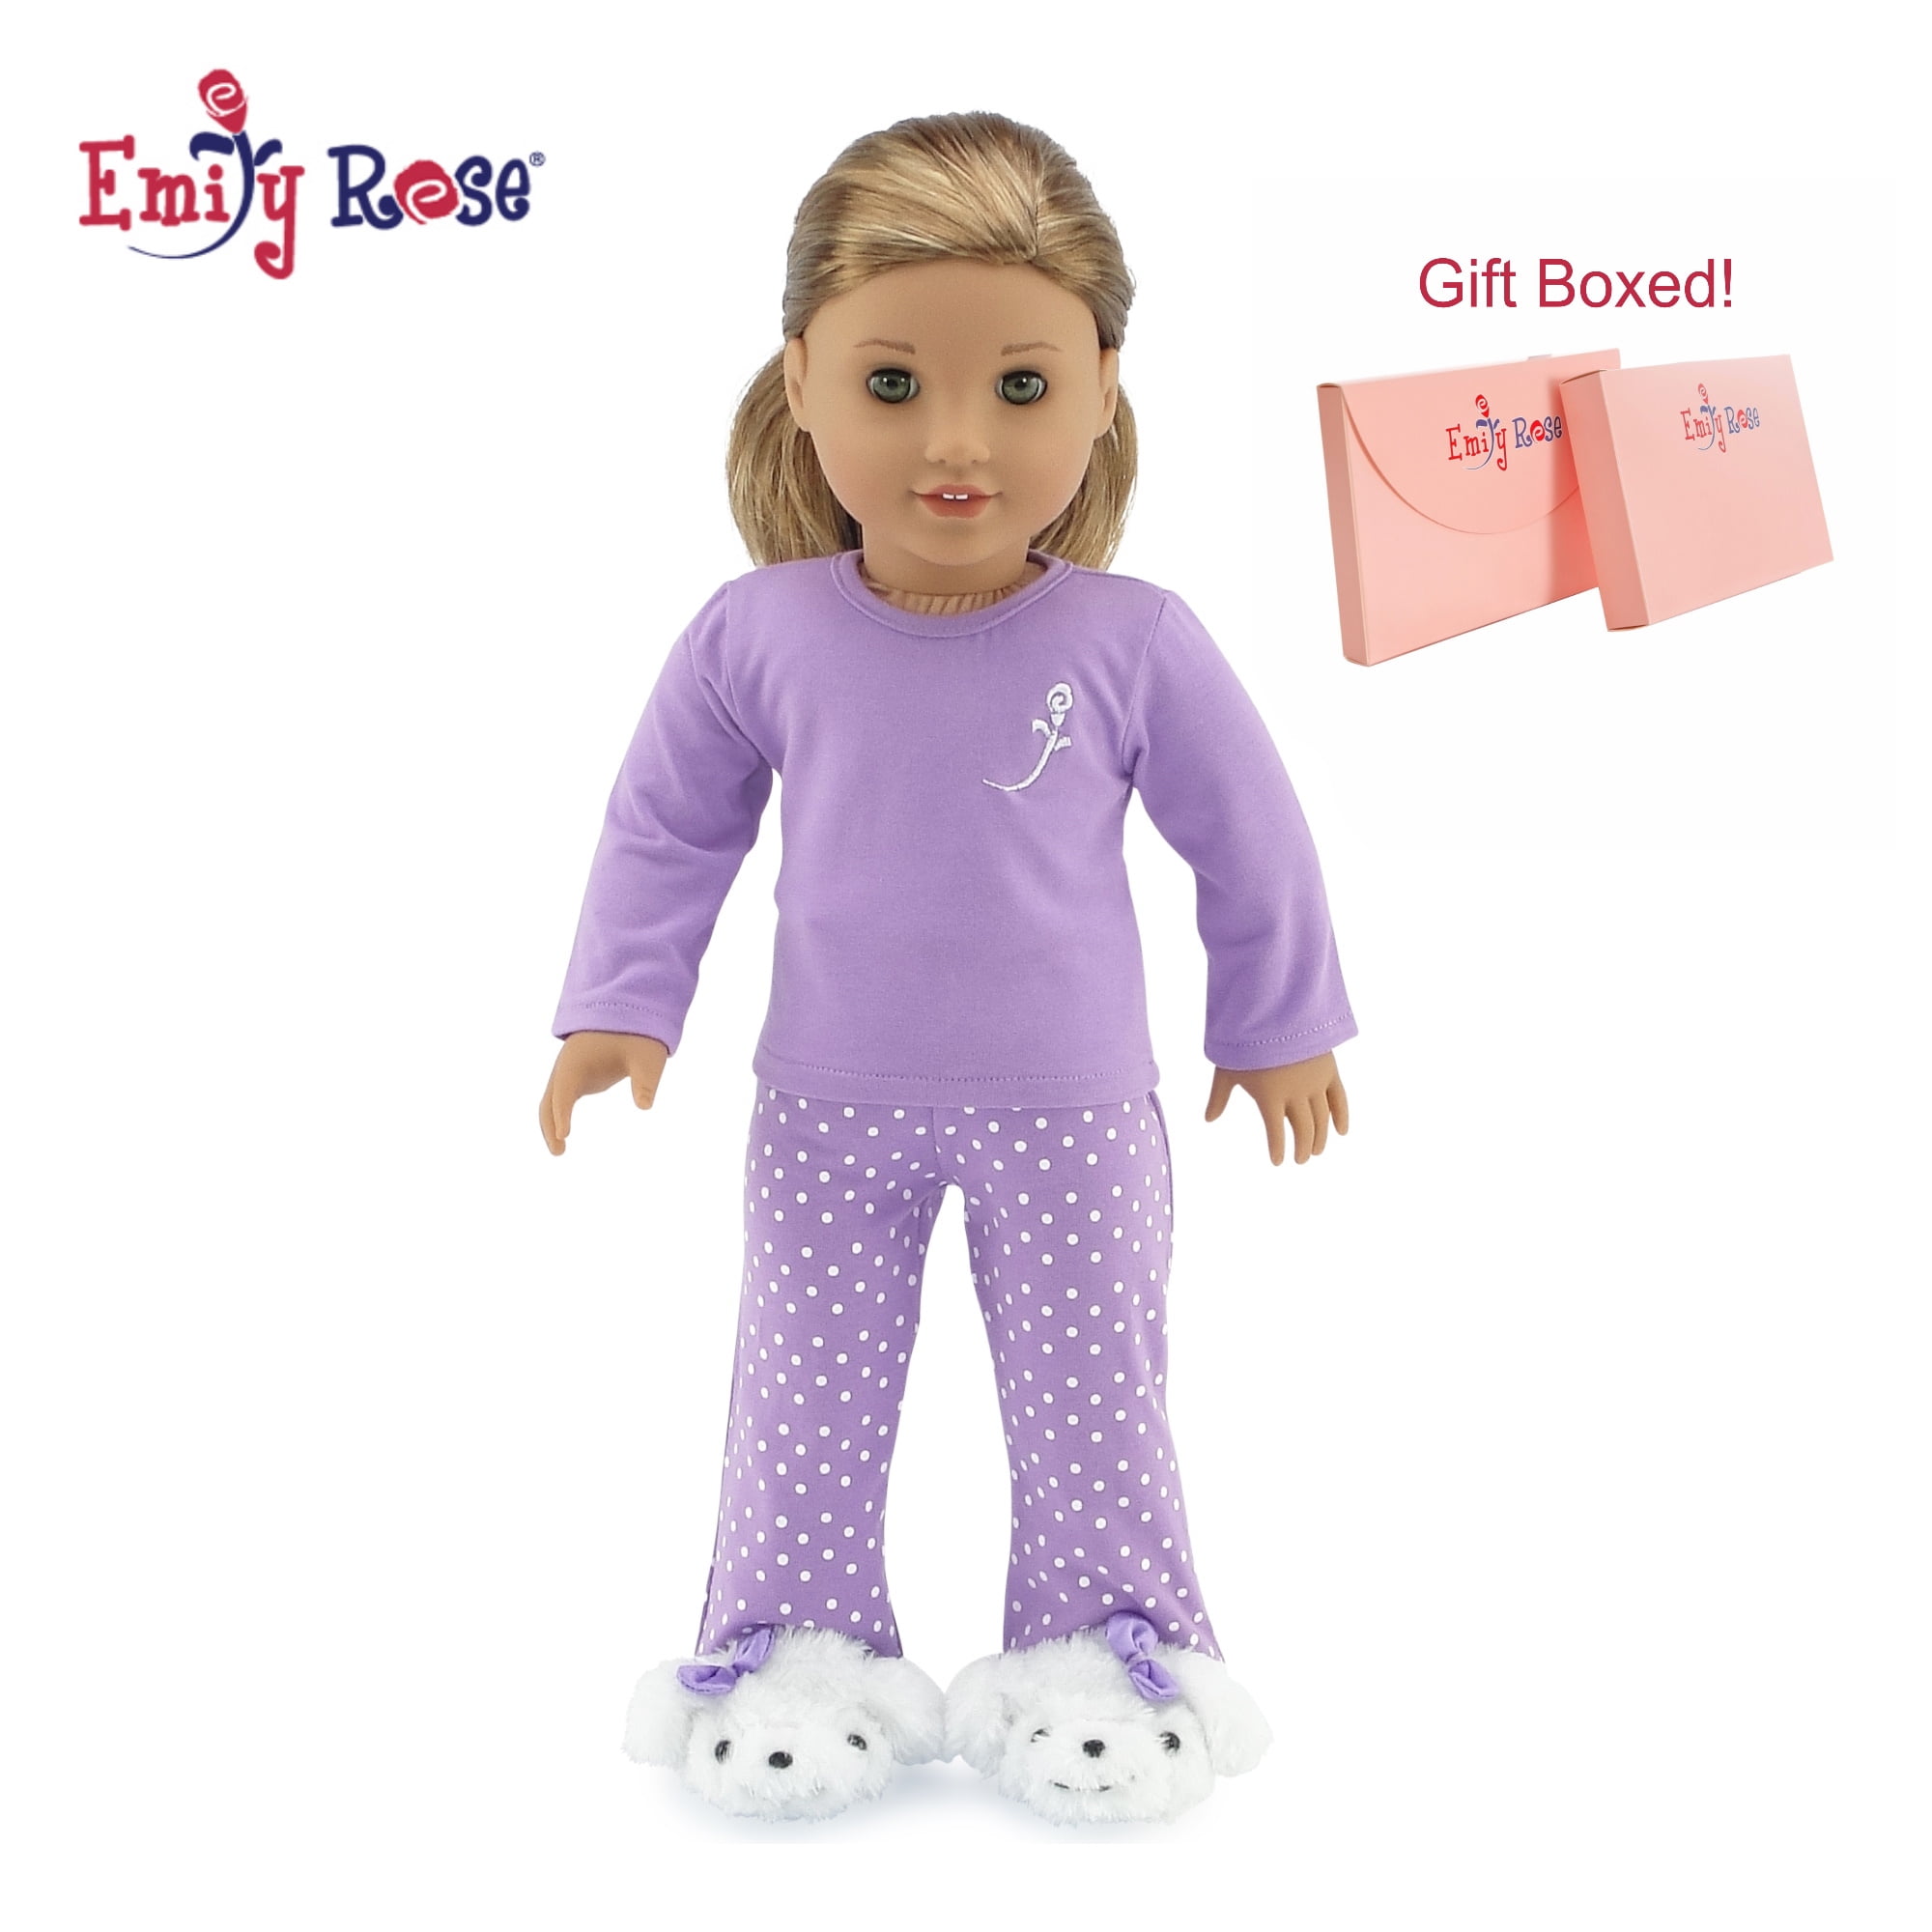 18" Heavy Large Lovely Bedtime Nightie Baby Girls Doll Vinyl Outfit Included 